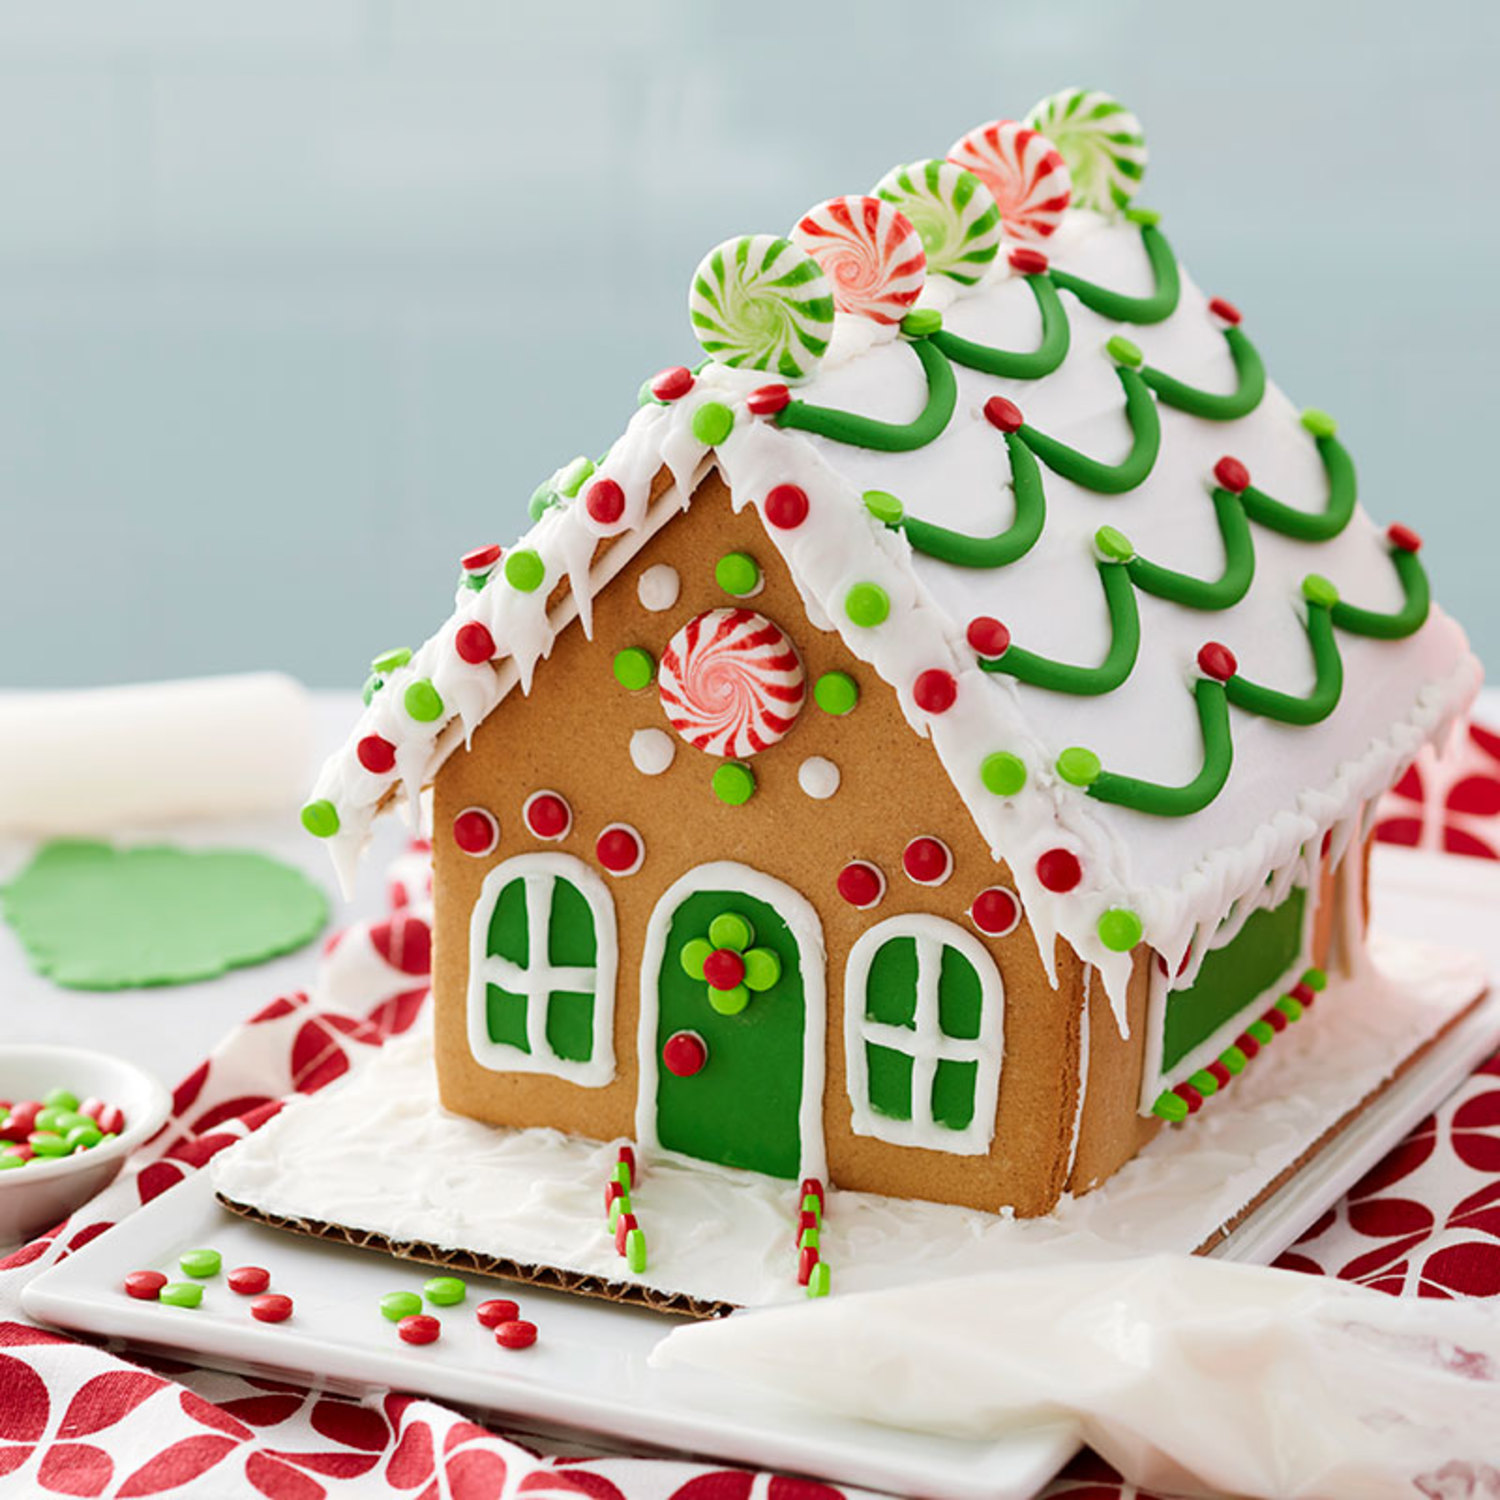 How to Make Fondant Garland for a Gingerbread House